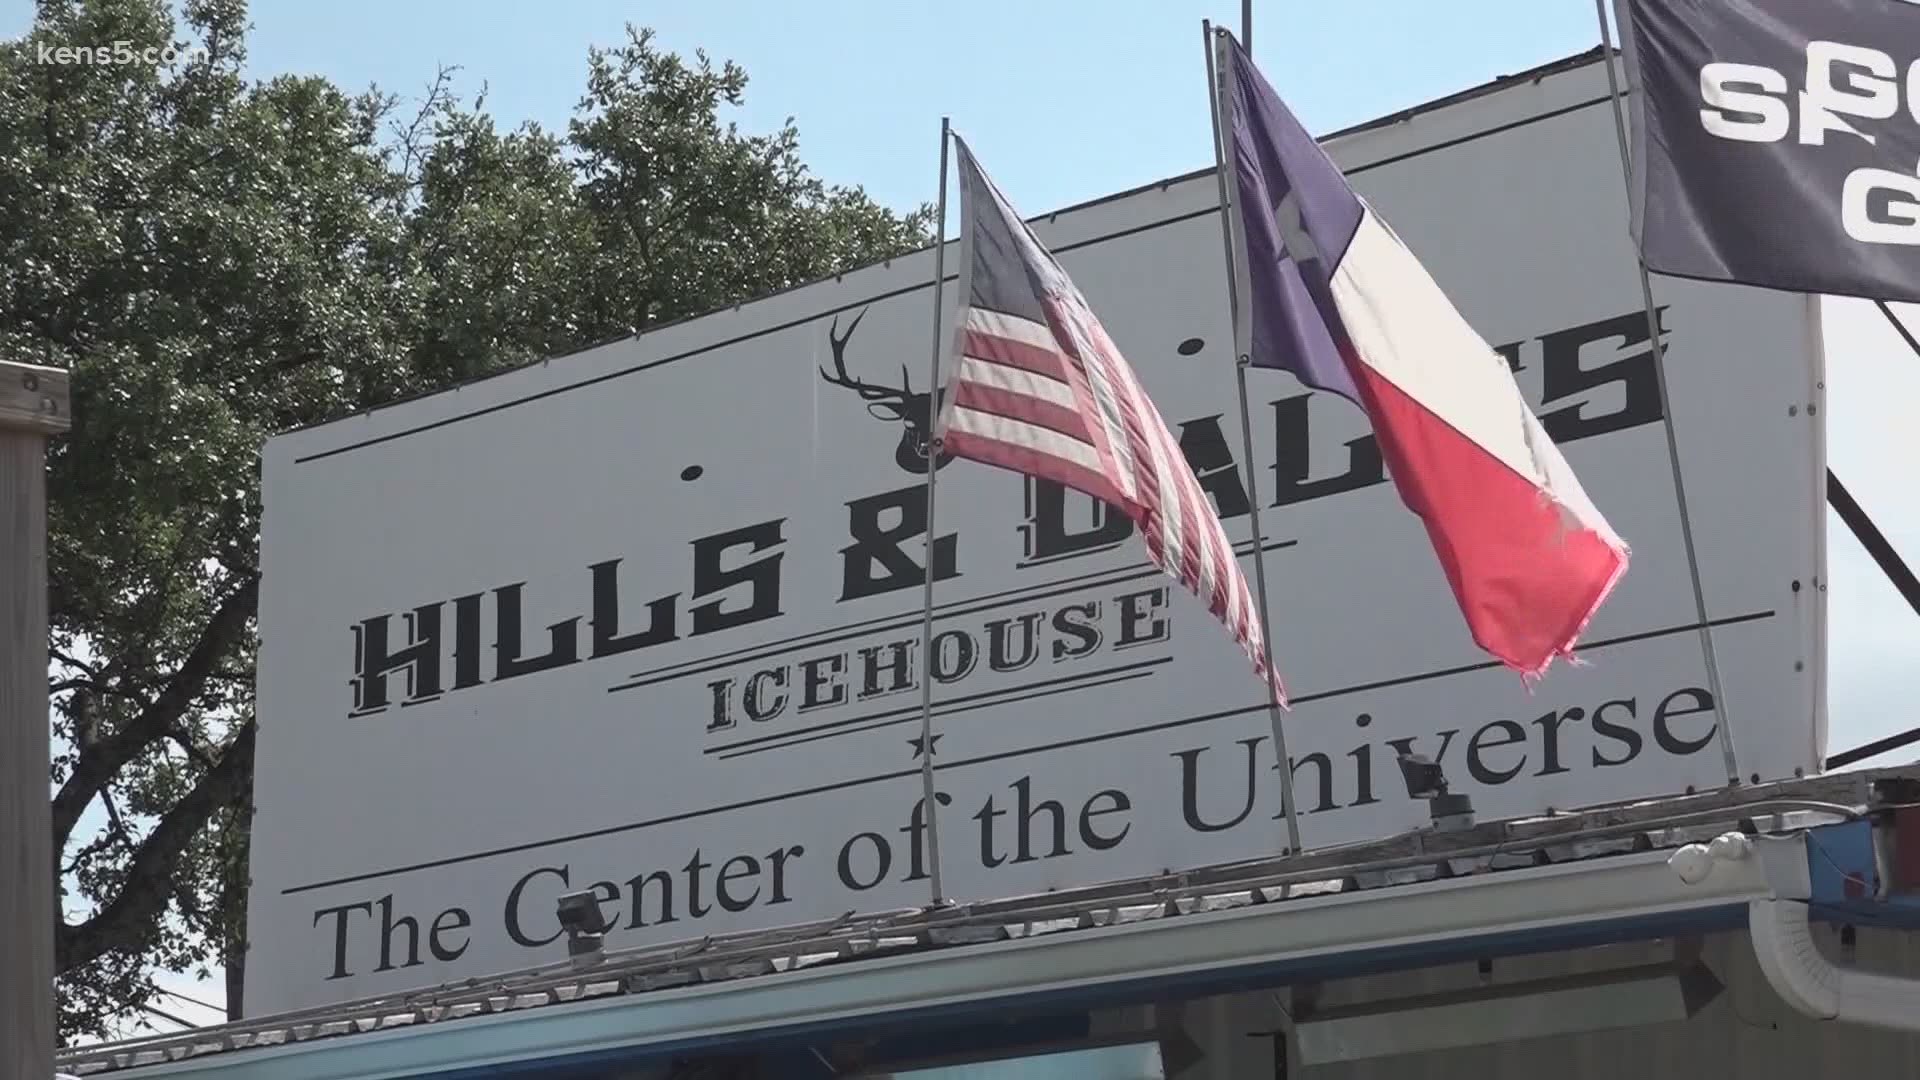 The co-owner of Hills & Dales Icehouse, decided to shut down that location, along with his two other bars. He said a handful of employees had tested positive.